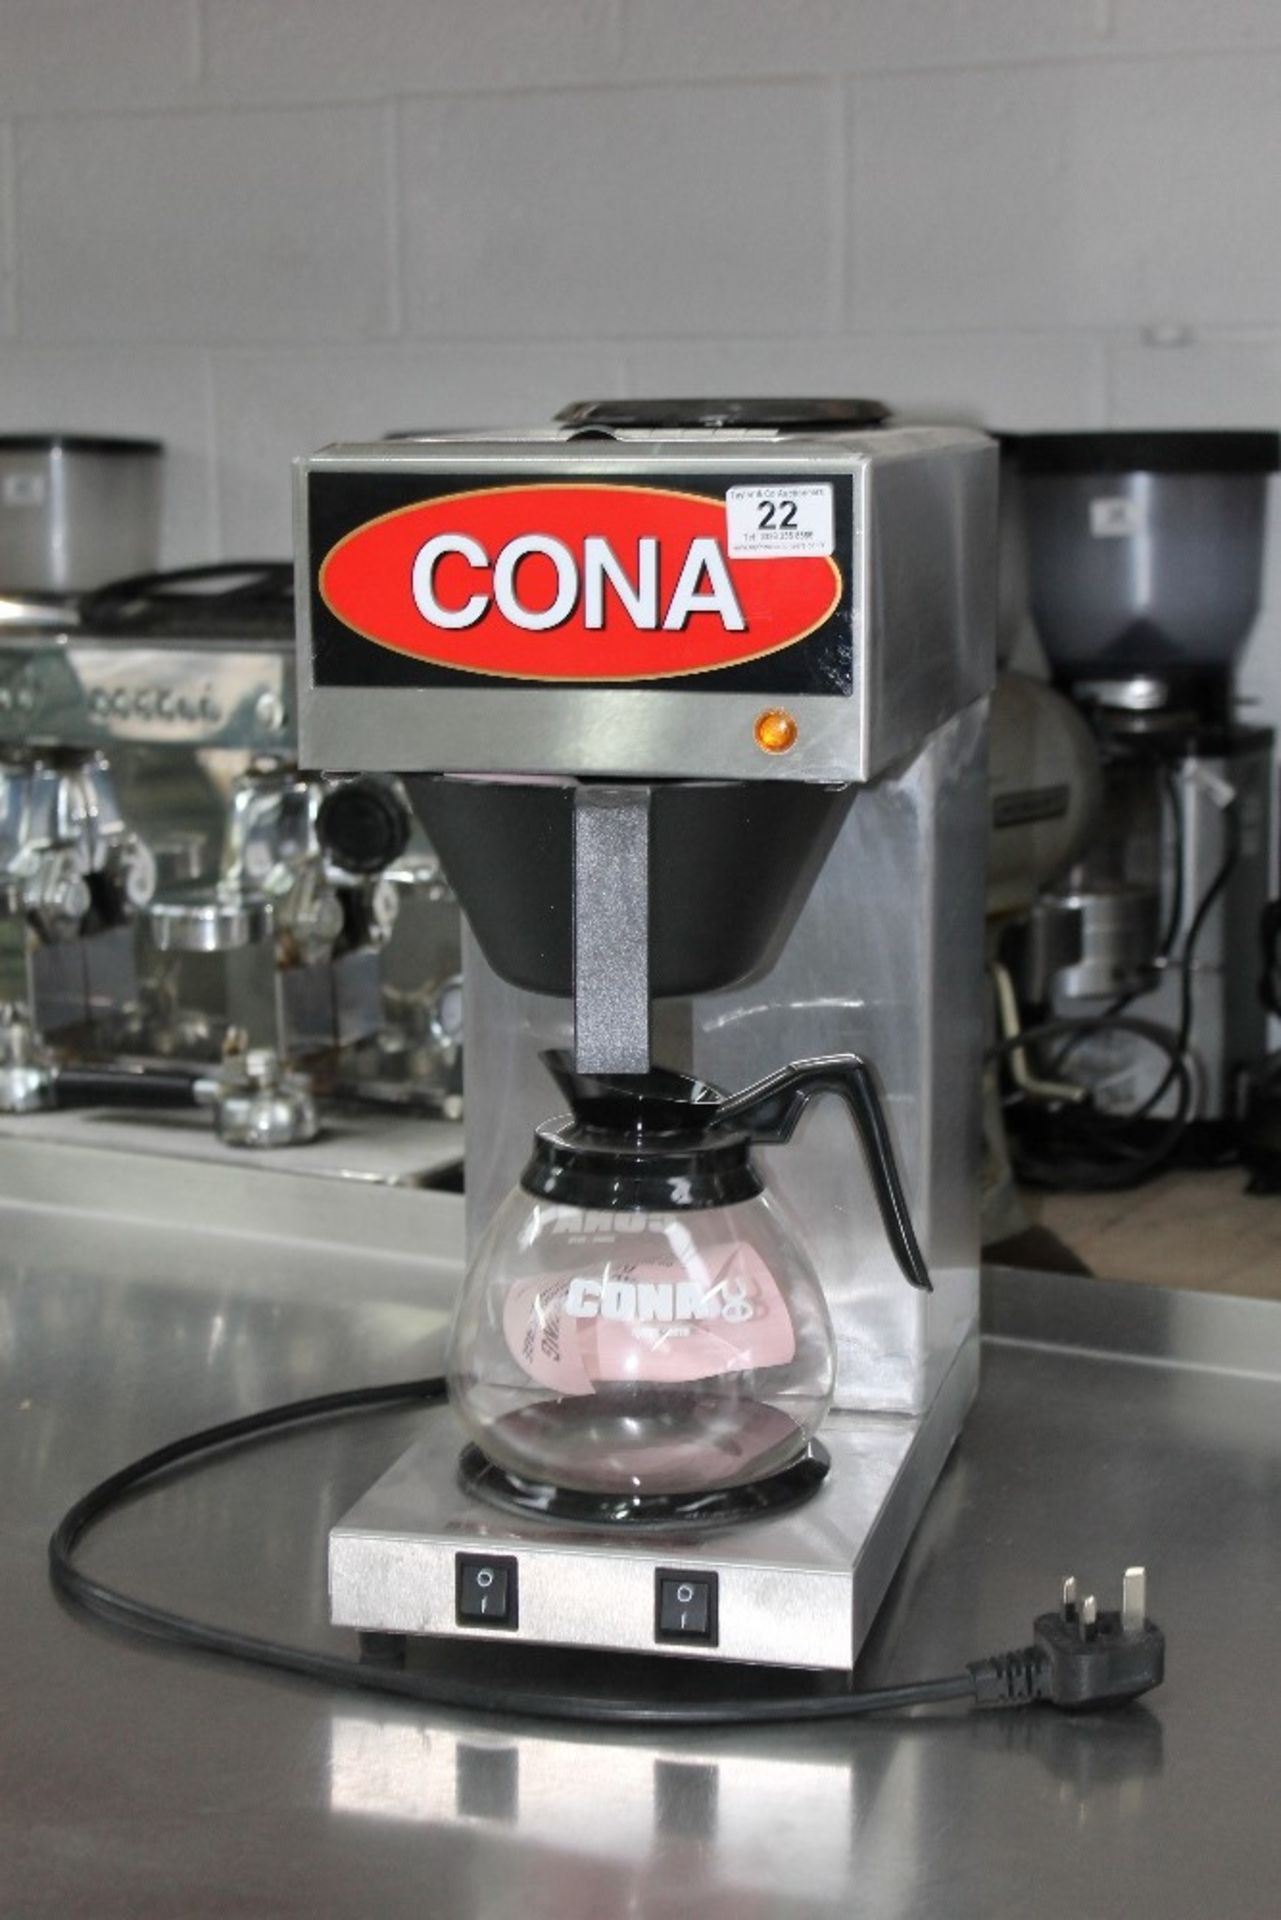 New Cona Pour-On Coffee Brewer – NO VAT